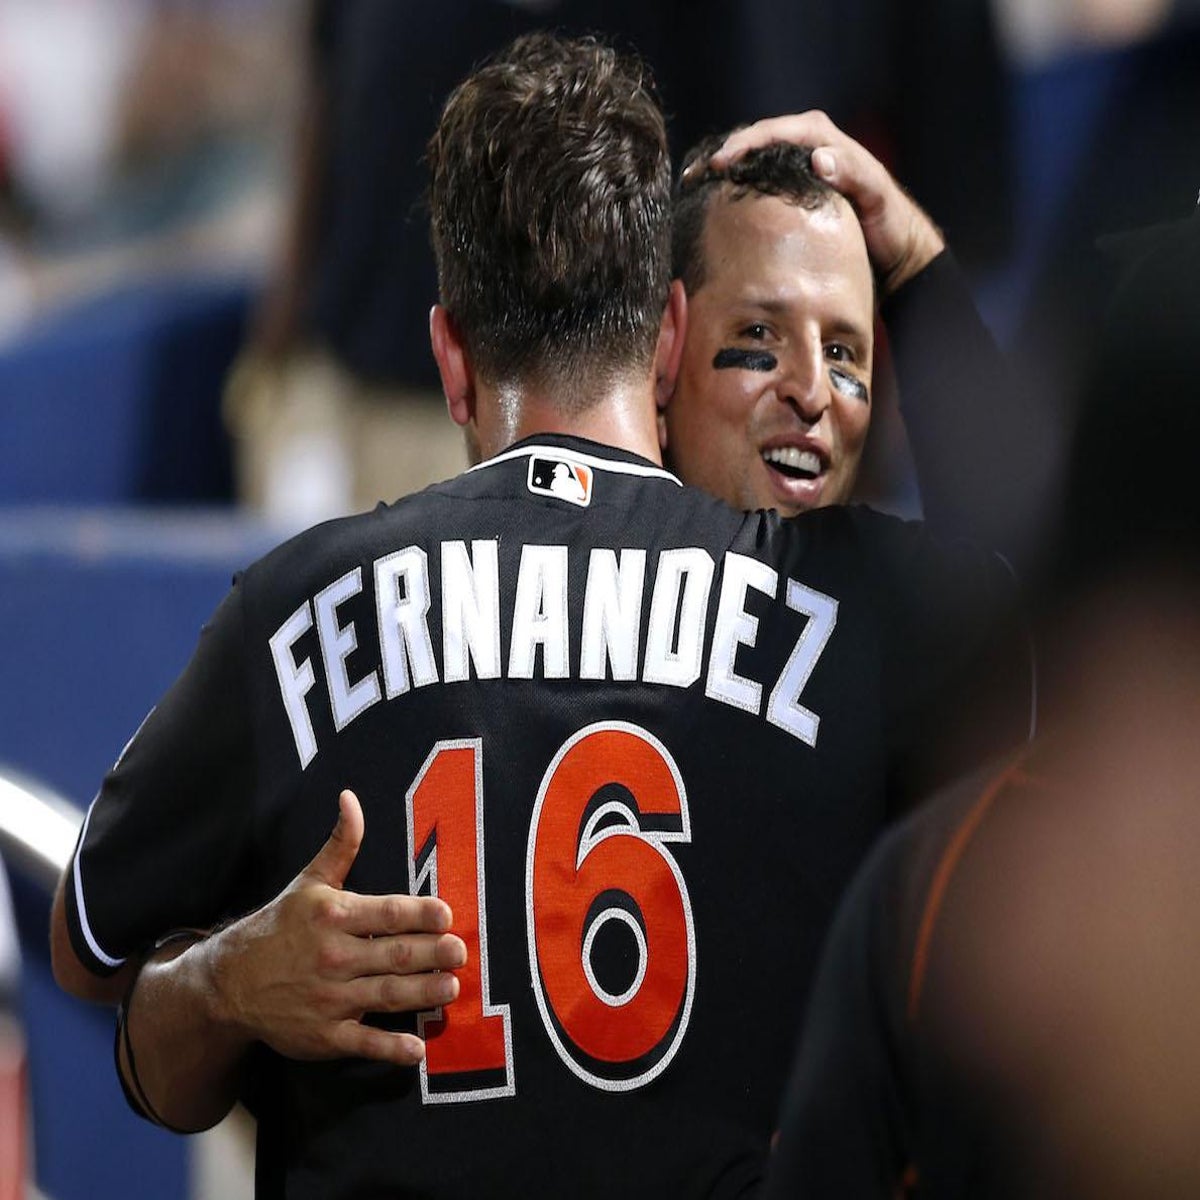 Tragic baseball star Jose Fernandez posted picture of pregnant